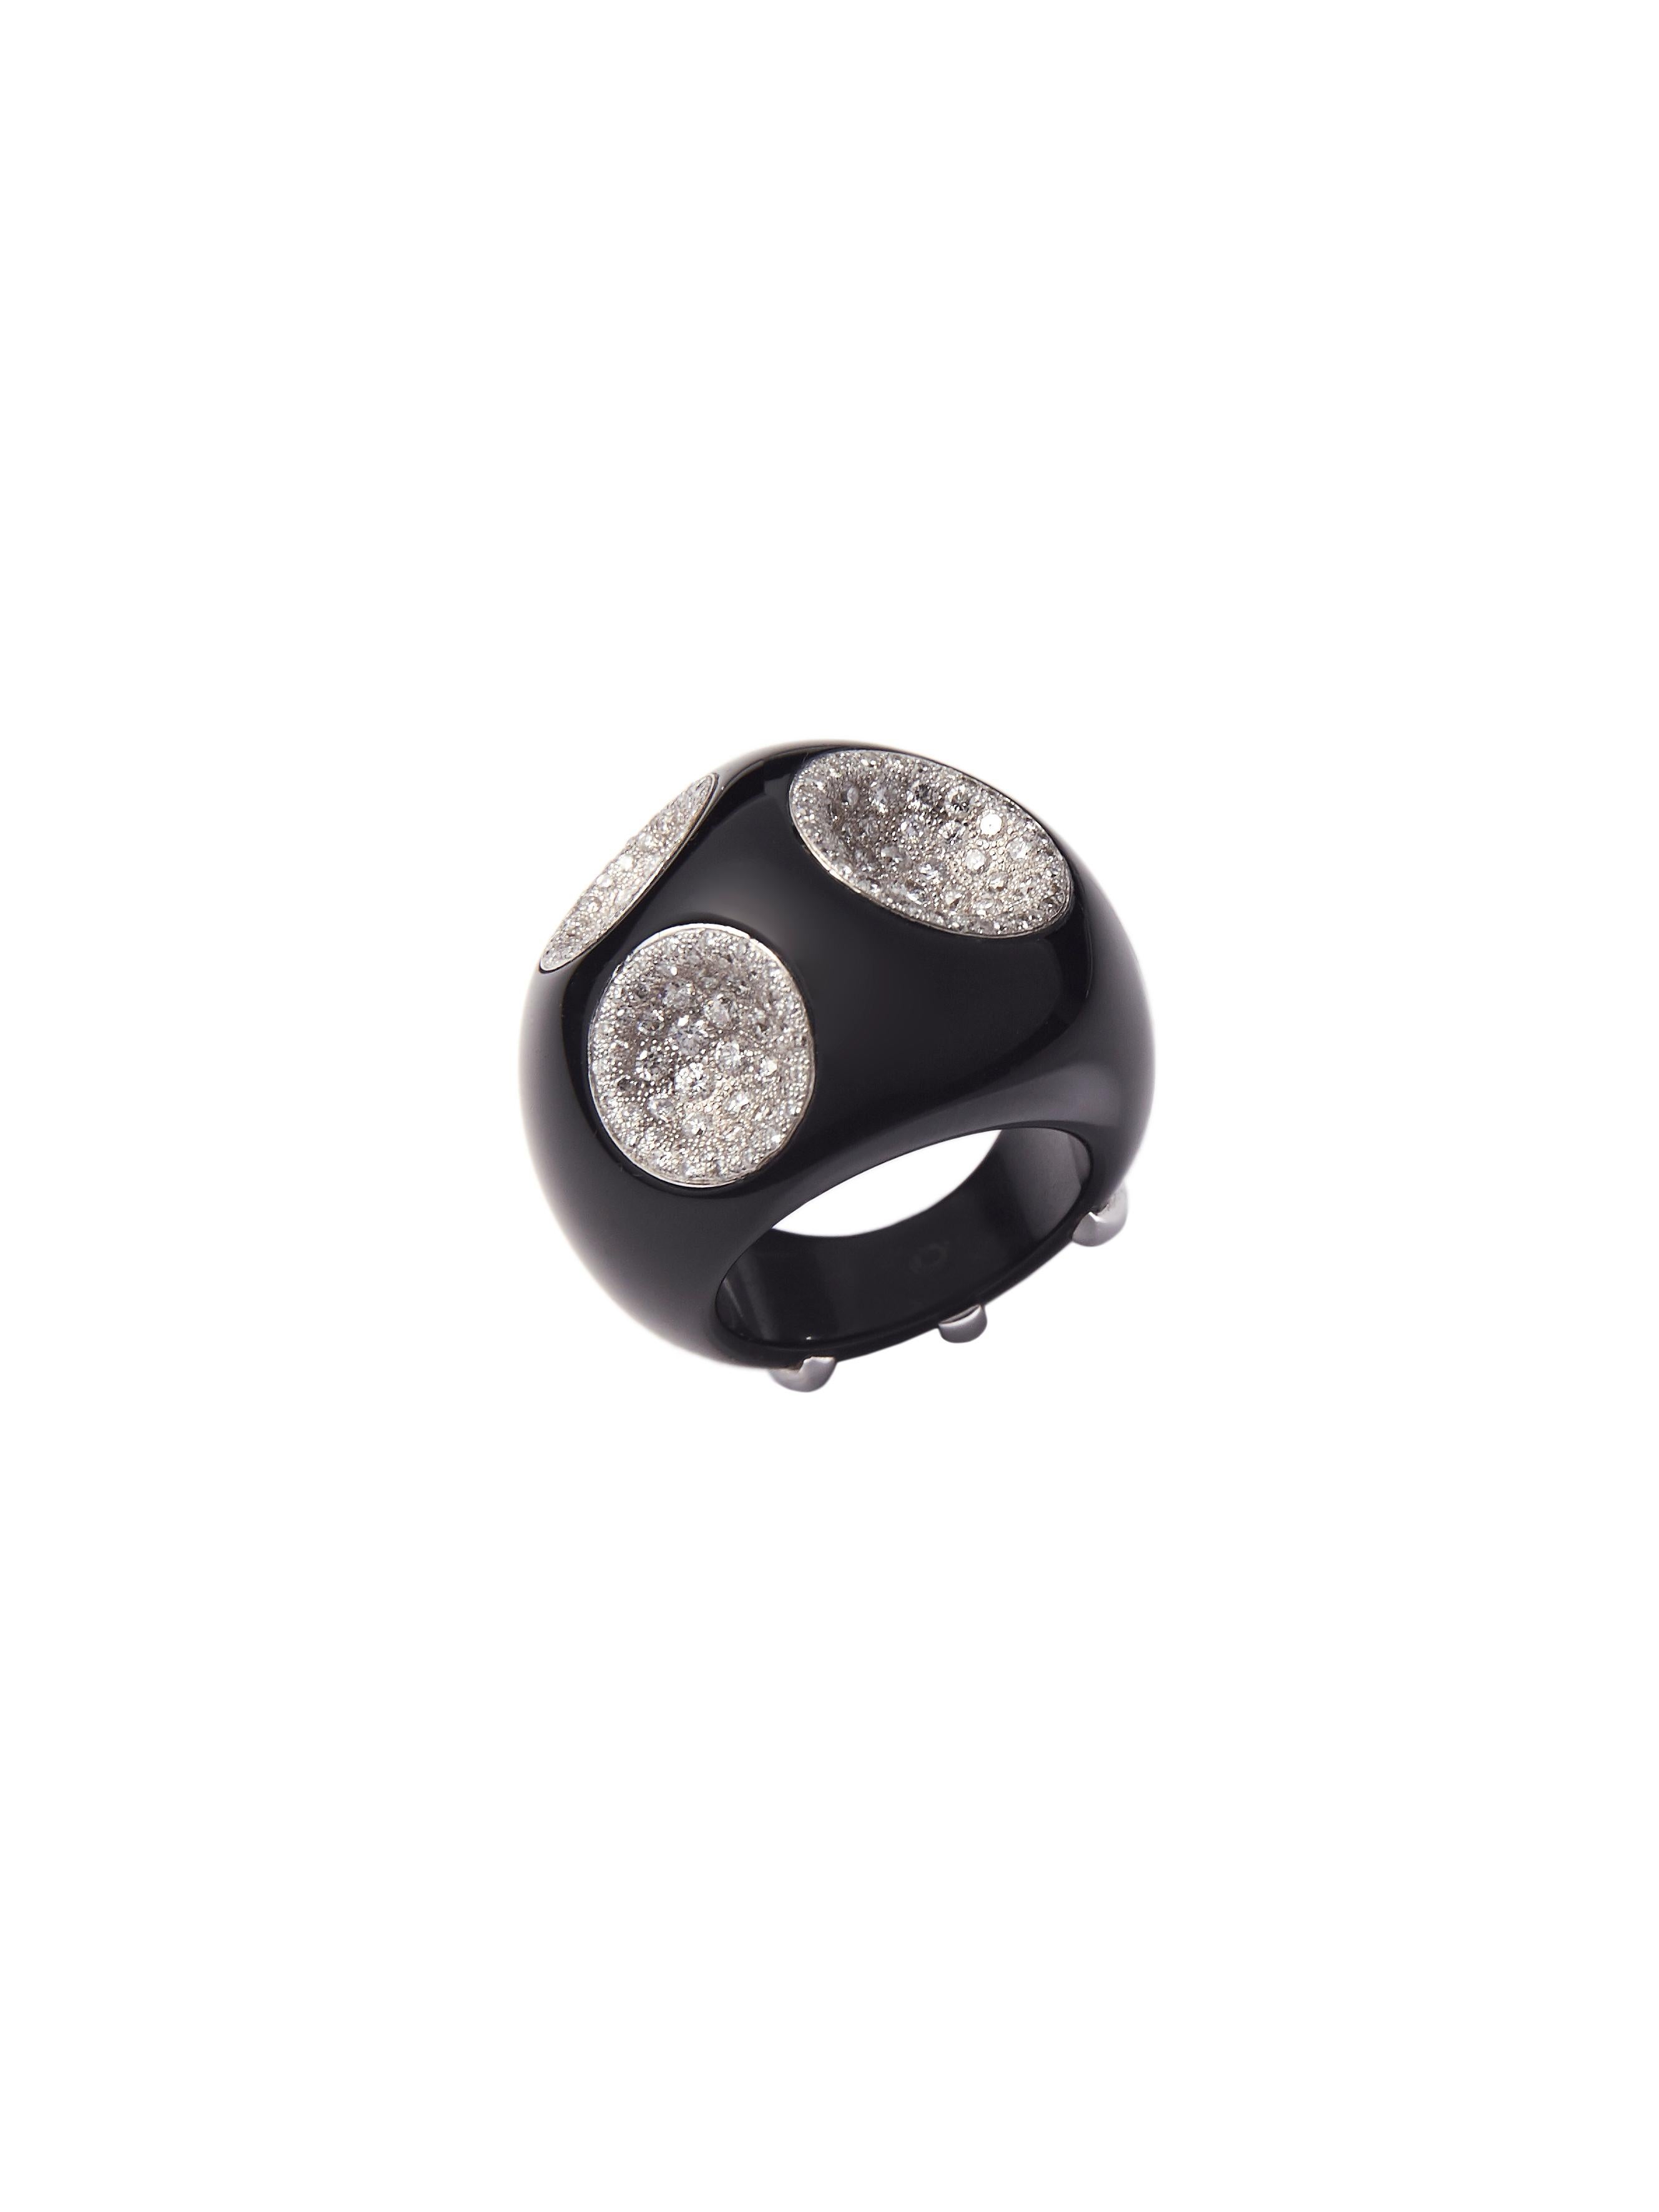 Rough Cut Onyx Ring with 3 Circles Paved with Diamonds